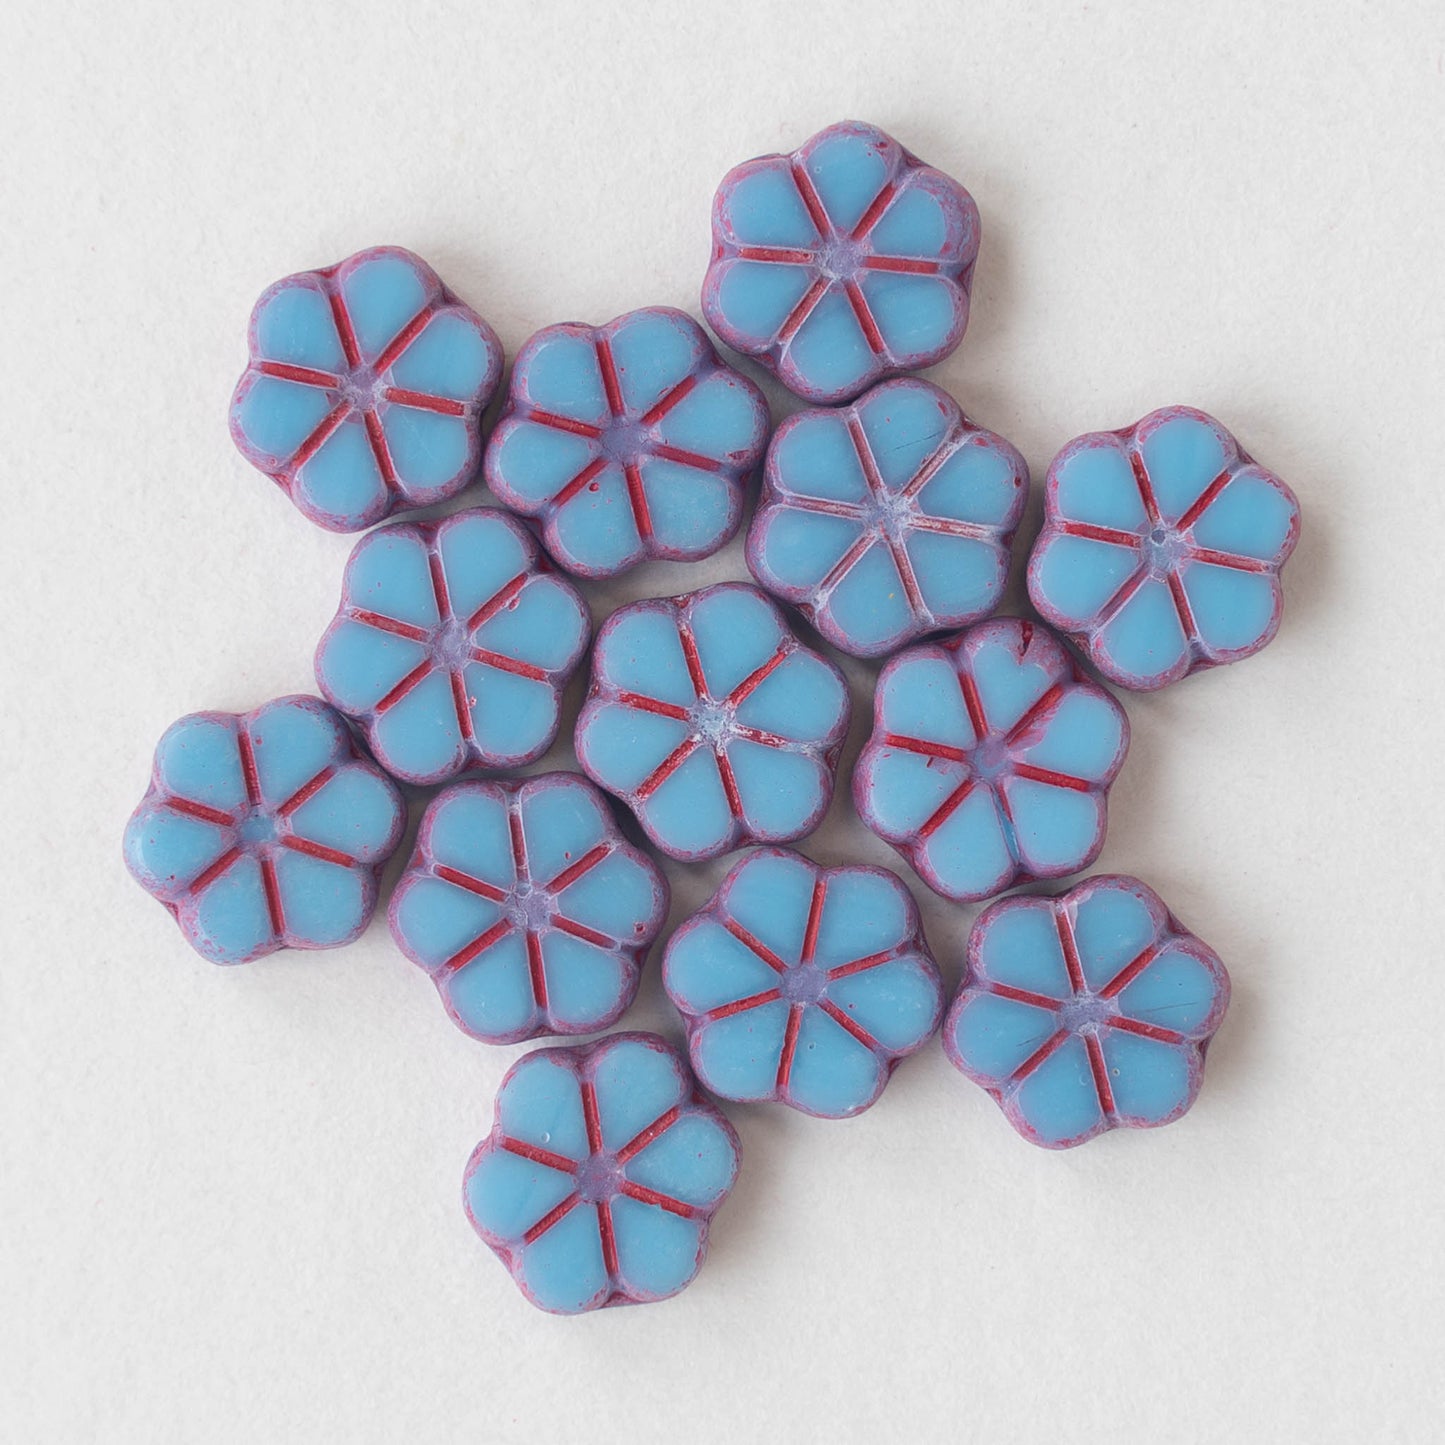 10mm Flower Beads - Opaque Aqua Blue with Pink Wash - 10